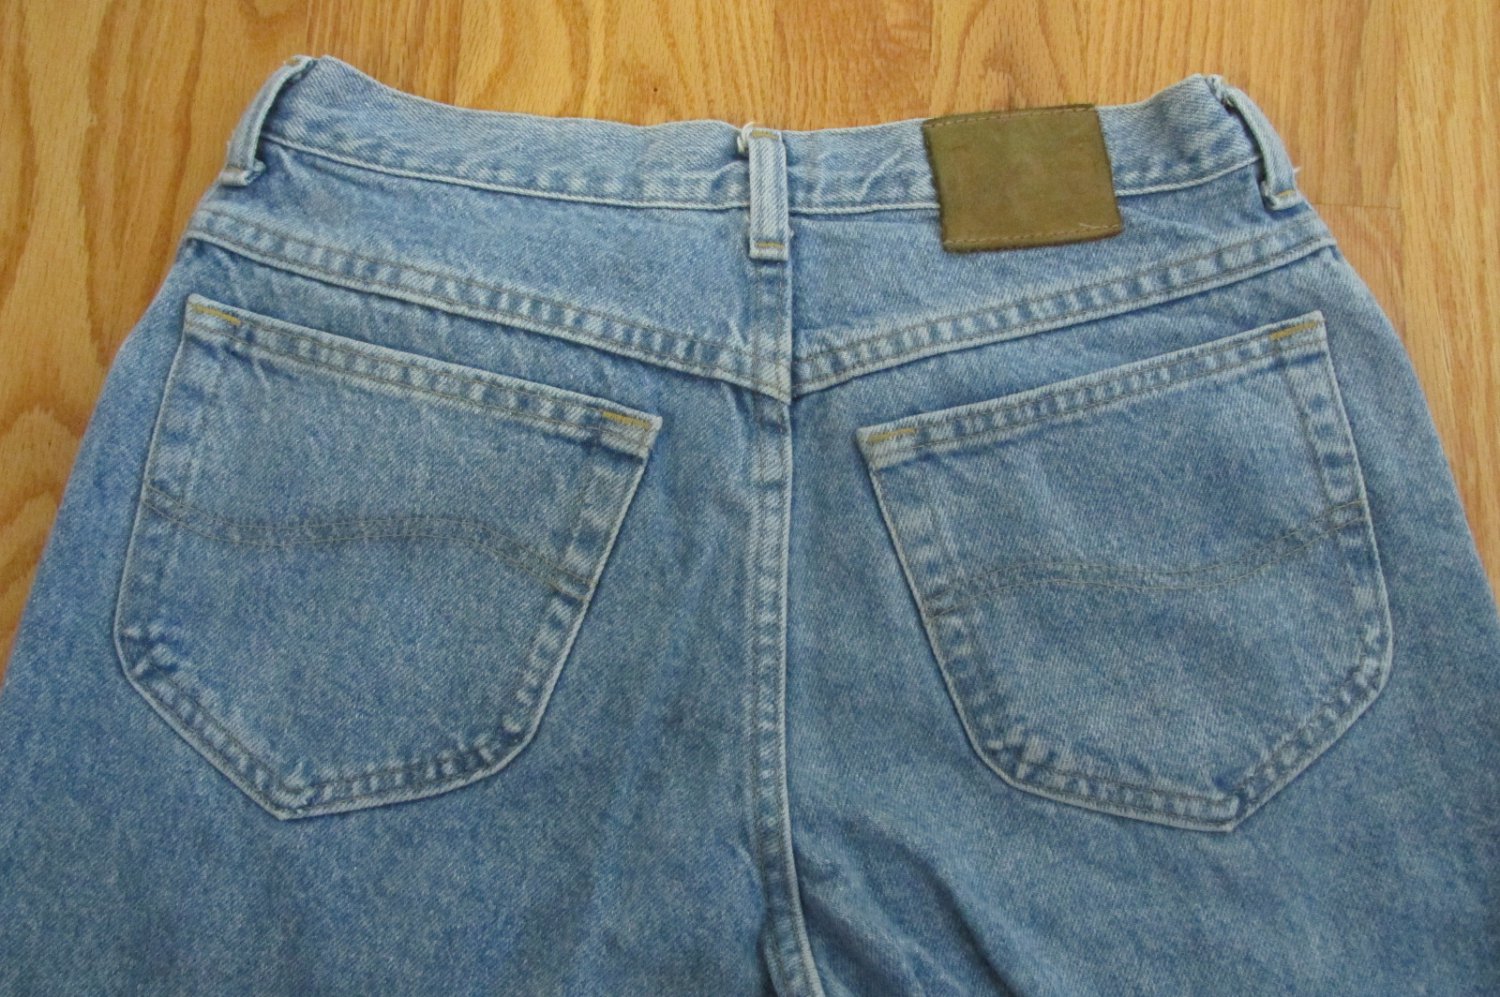 LEE 1889 MEN'S SIZE 29 X 29 1/2 JEANS LIGHT BLUE STONE WASHED 80'S ...